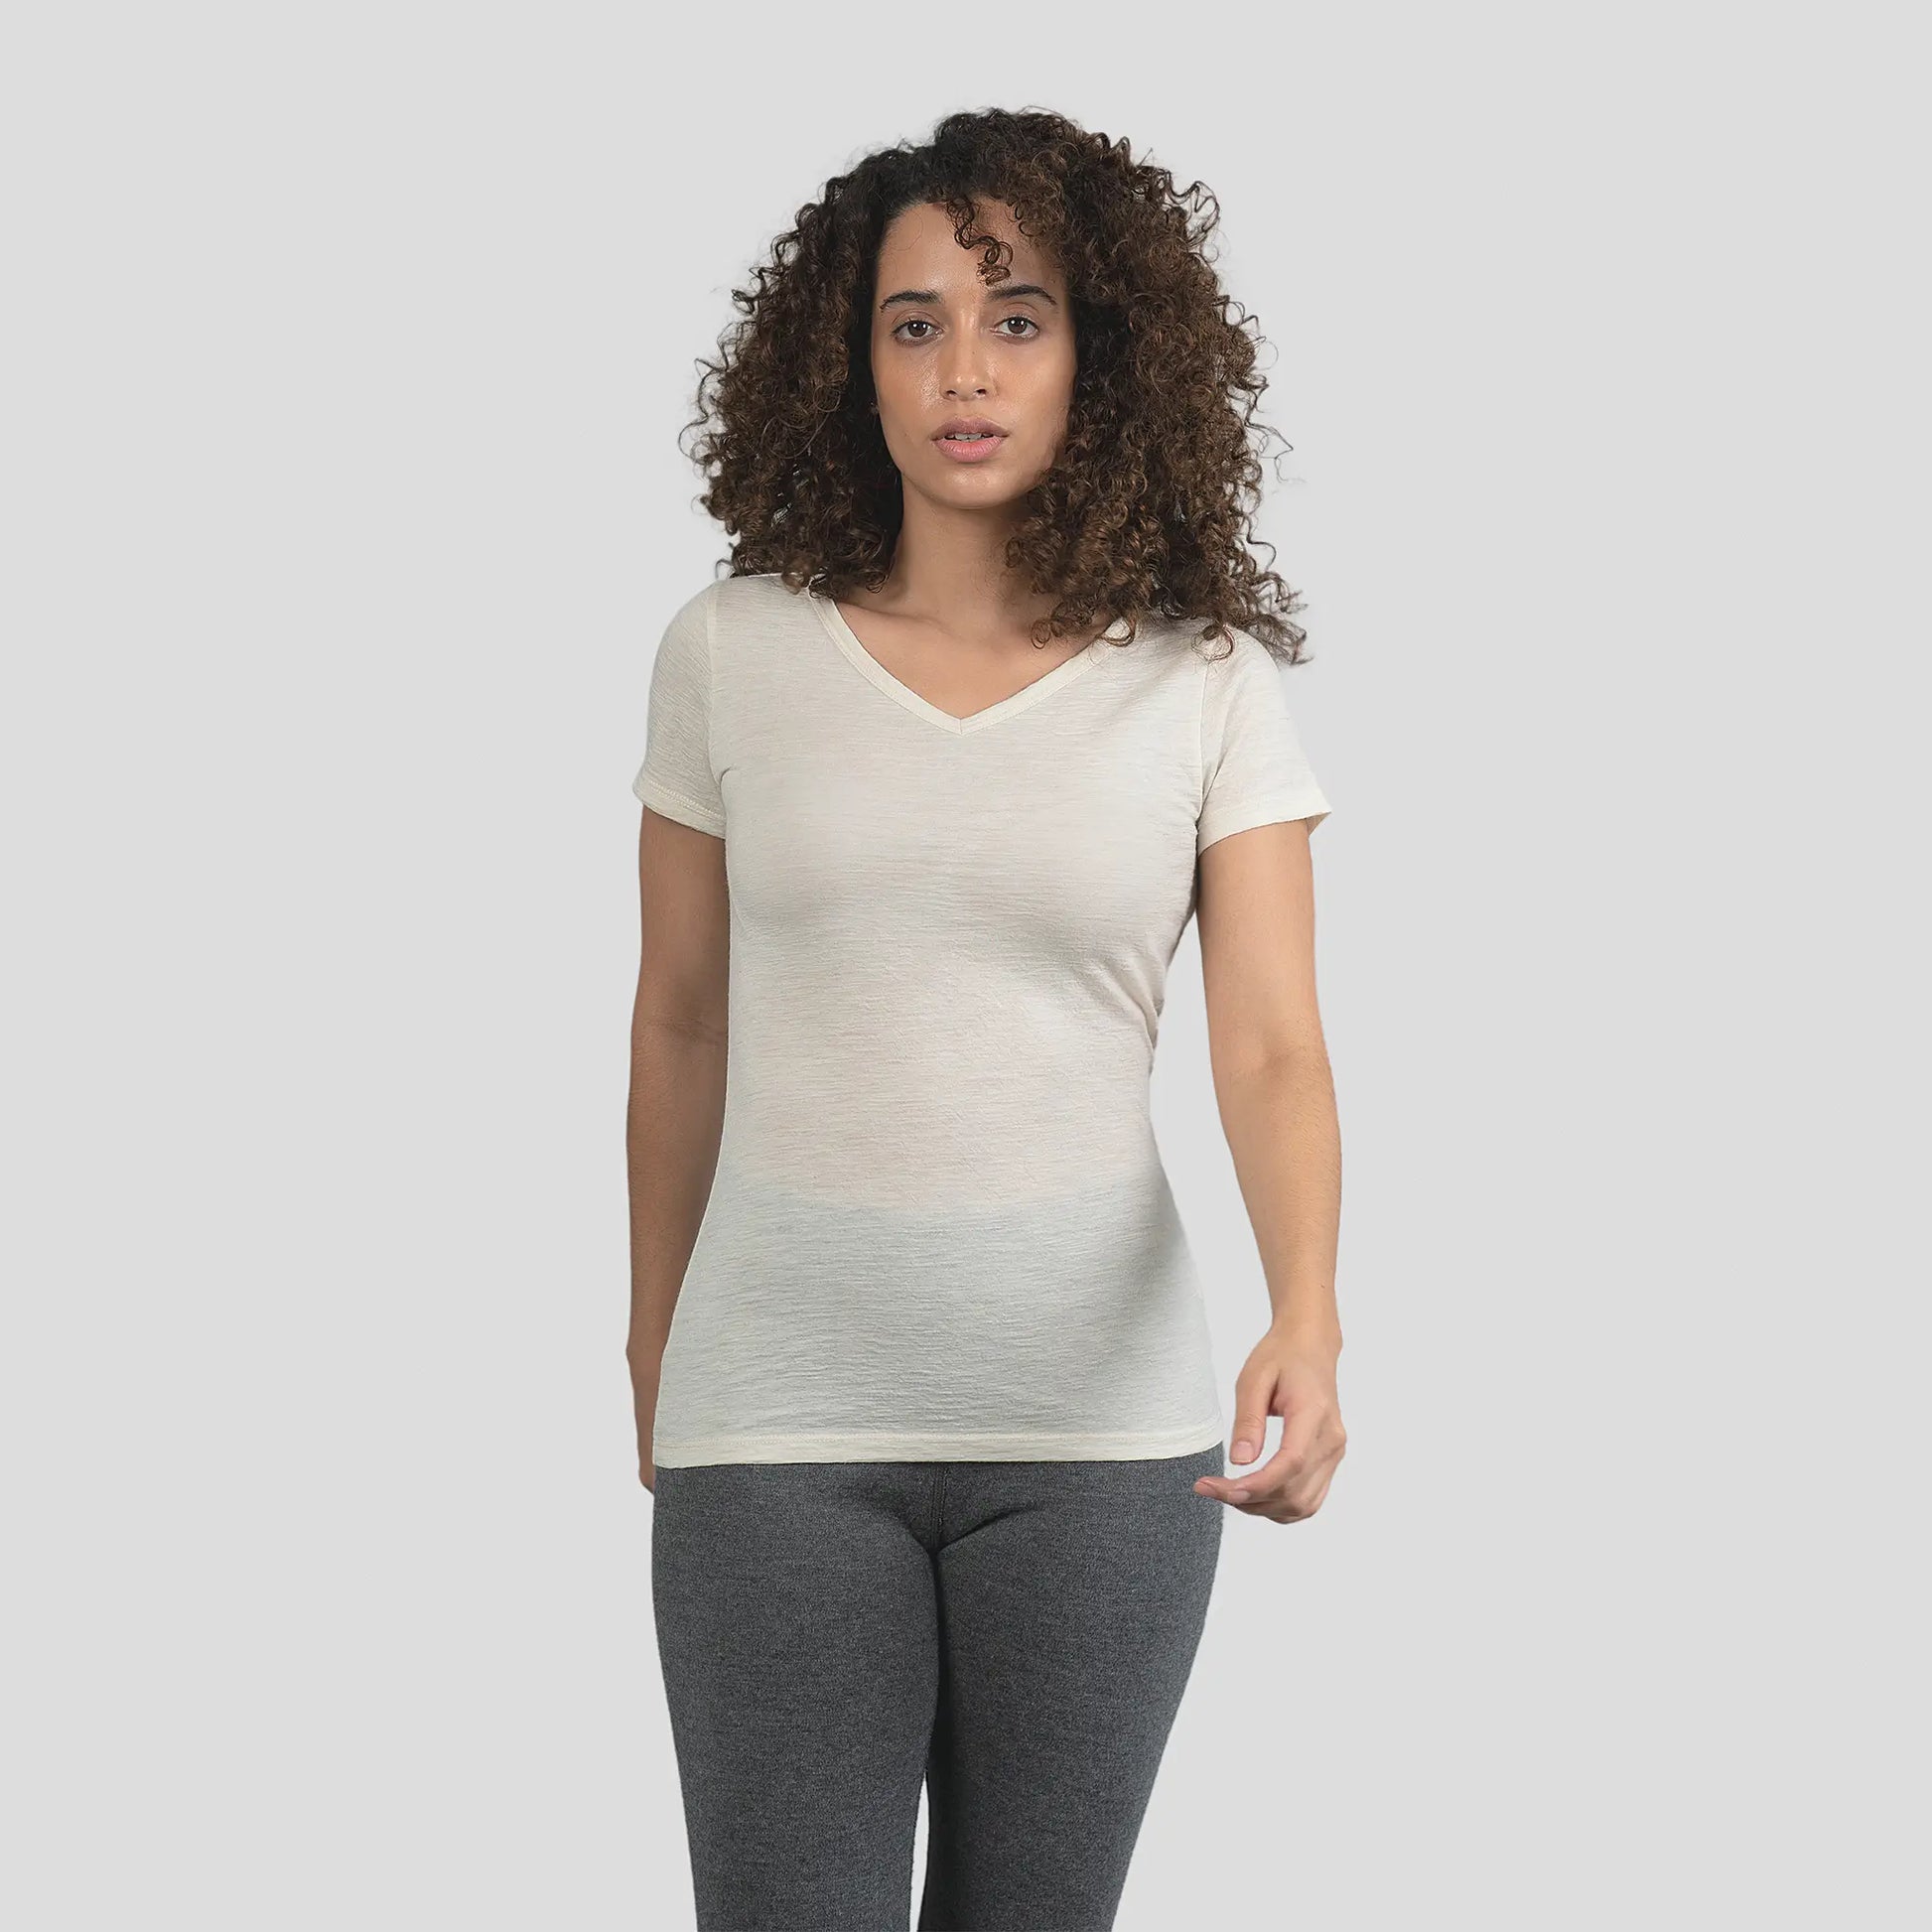 womens ultimate outdoor vneck tshirt color natural white